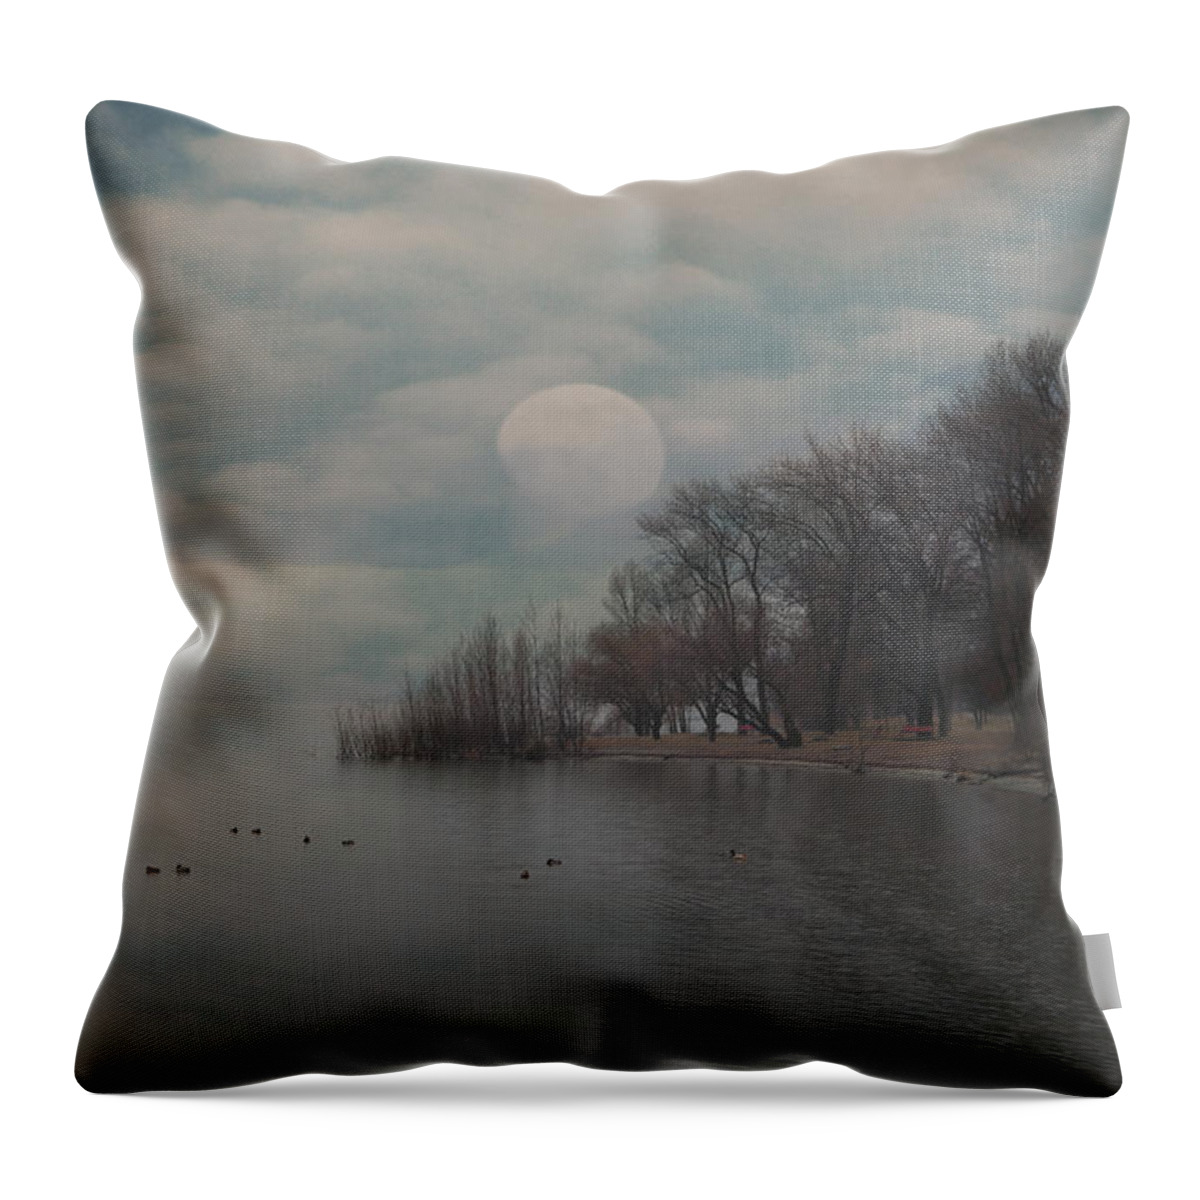 Bay Throw Pillow featuring the photograph Landscape Of Dreams by Joana Kruse